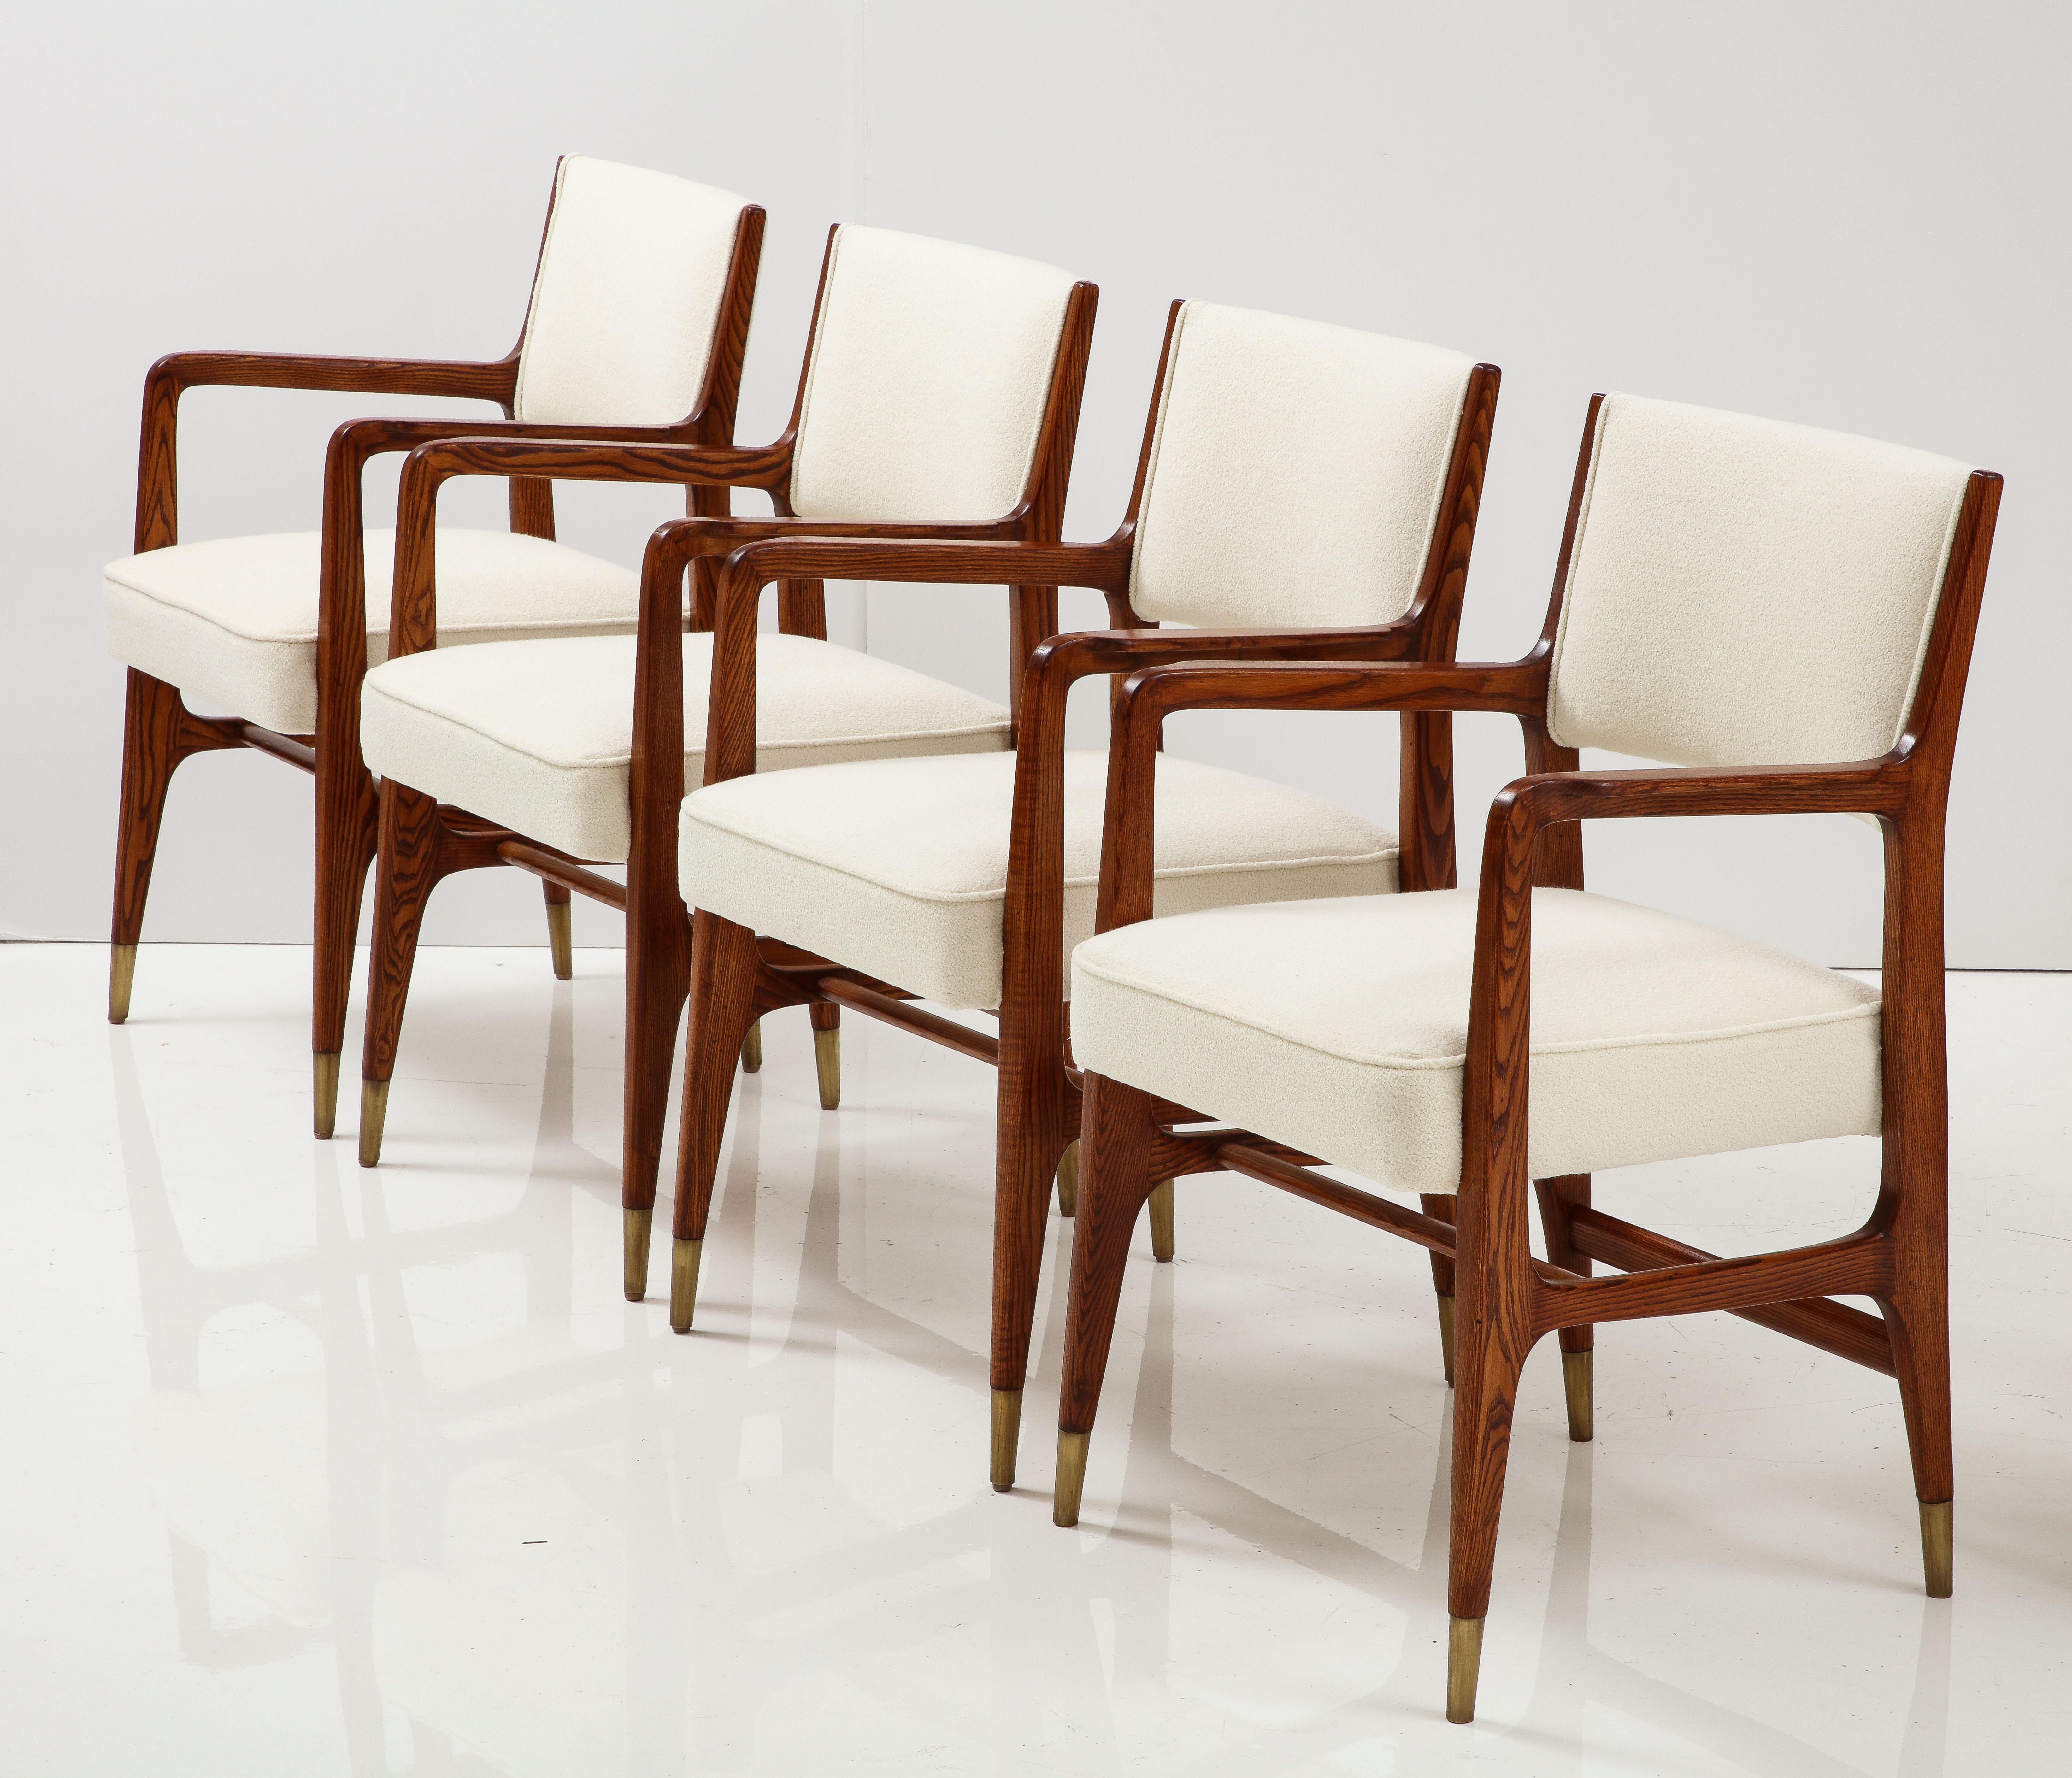 Mid-20th Century Gio Ponti for Cassina Rare Set of 12 Dining Chairs Model 110 in Ivory Bouclé